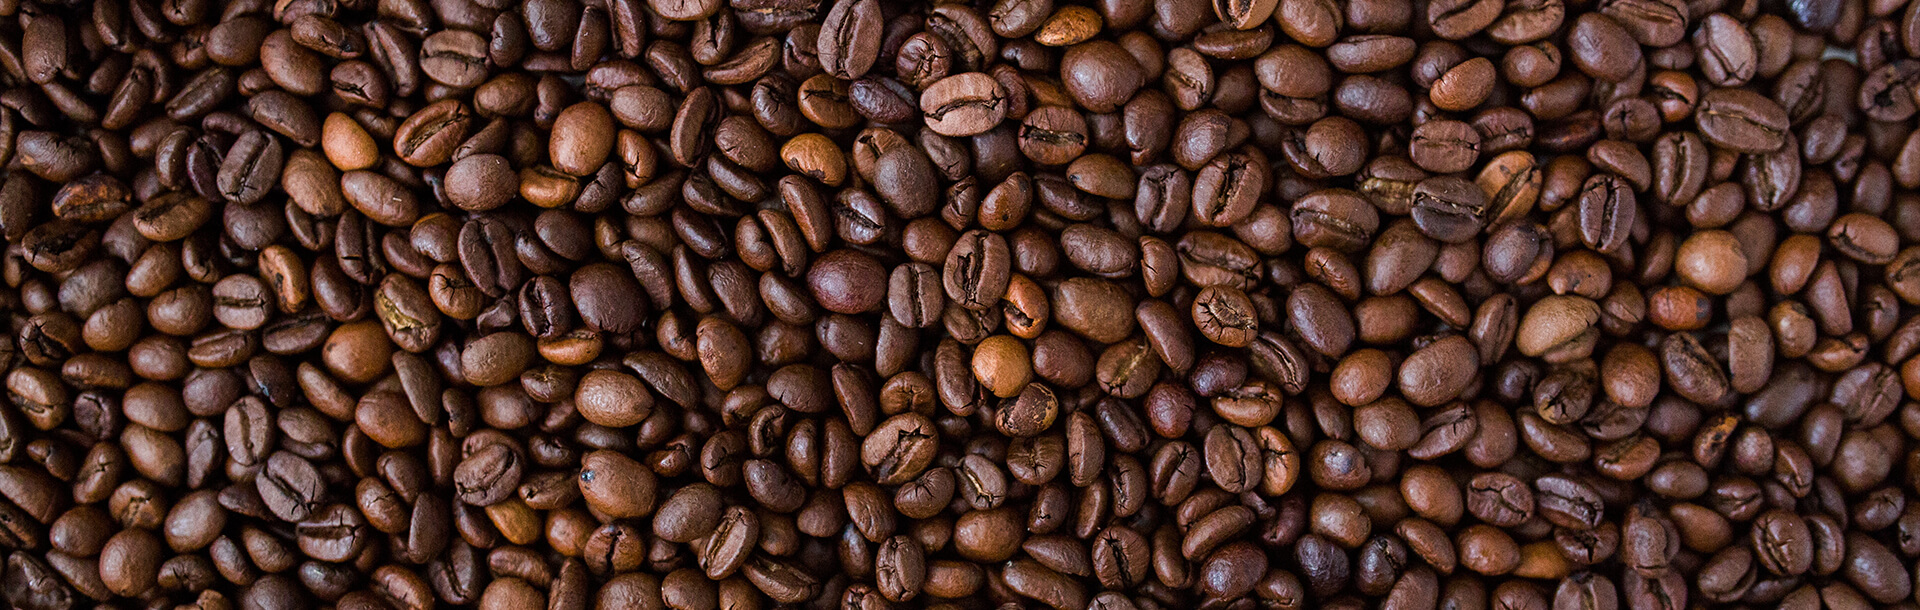 Professional photography of coffee beans